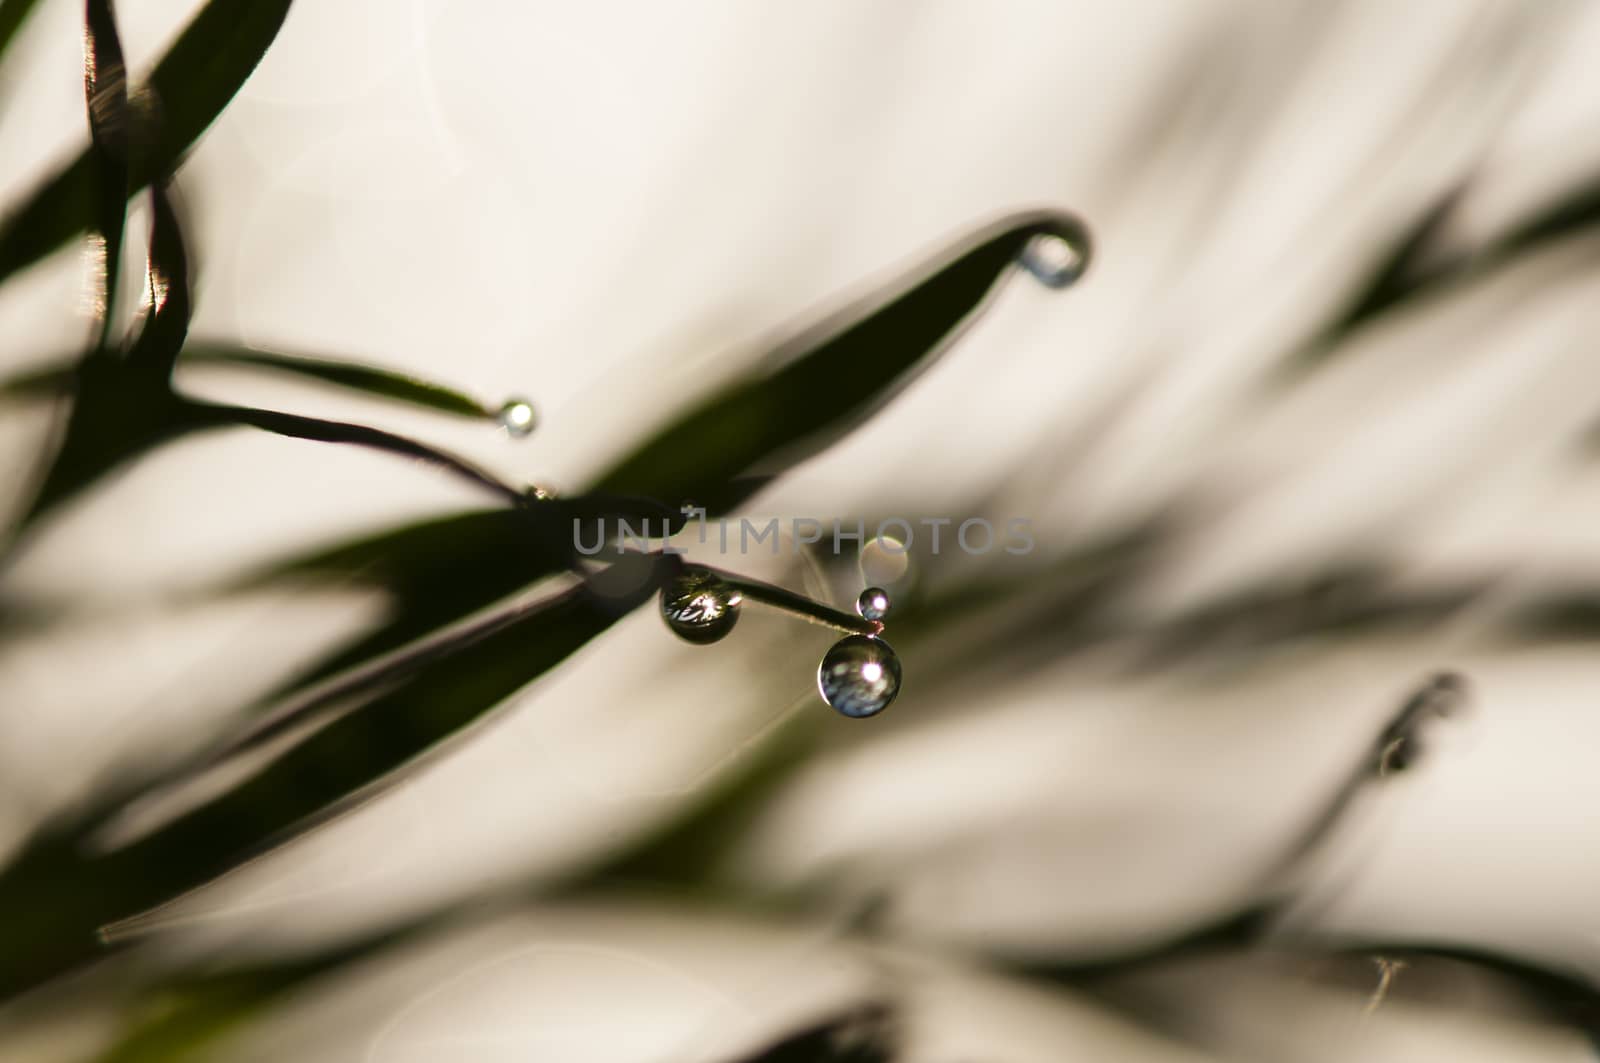 Dew drops on blades of grass  by AlessandroZocc